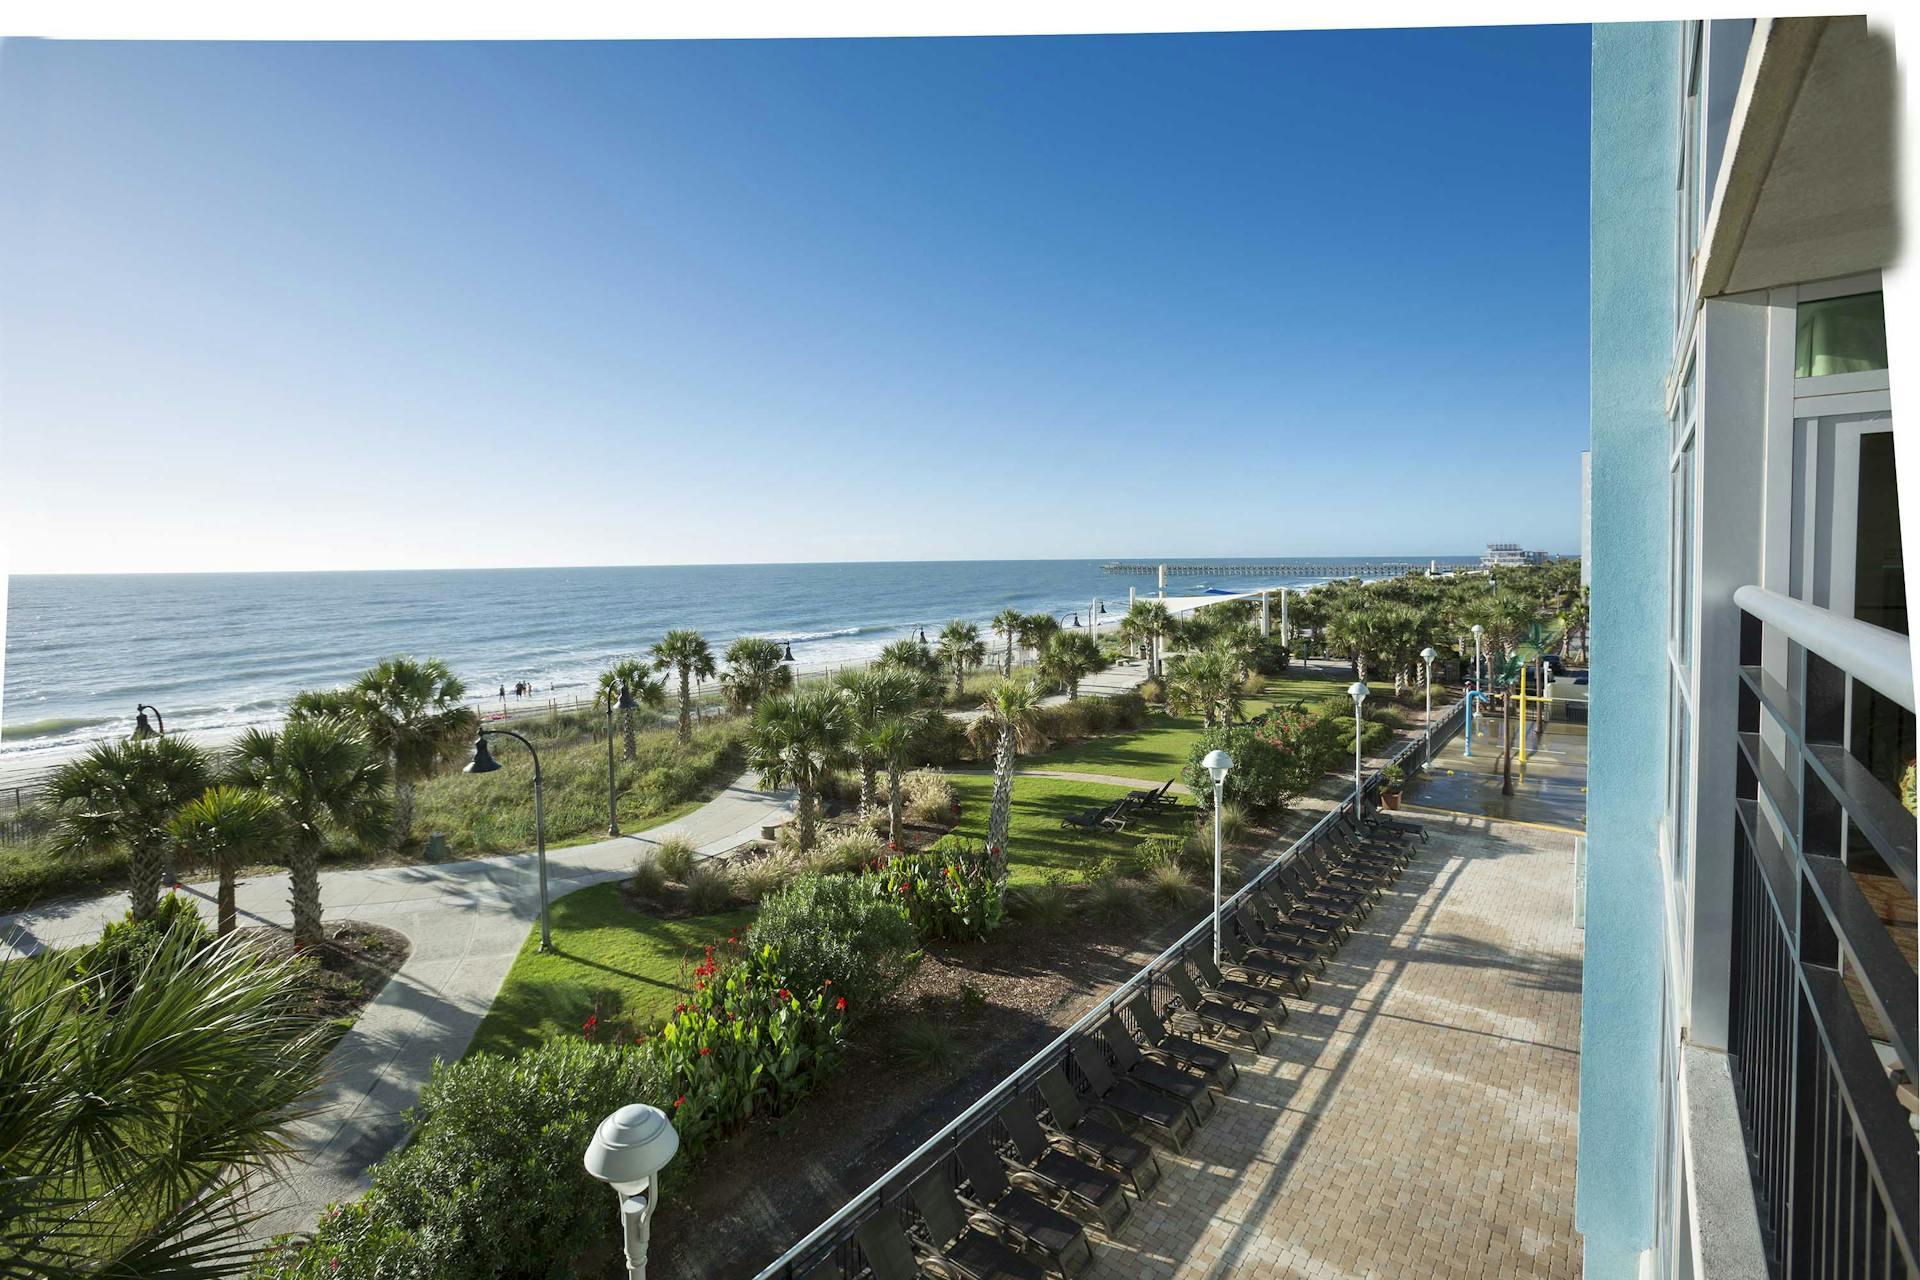 Bay View on the Boardwalk - 2 Bedroom Oceanfront King Condo - E